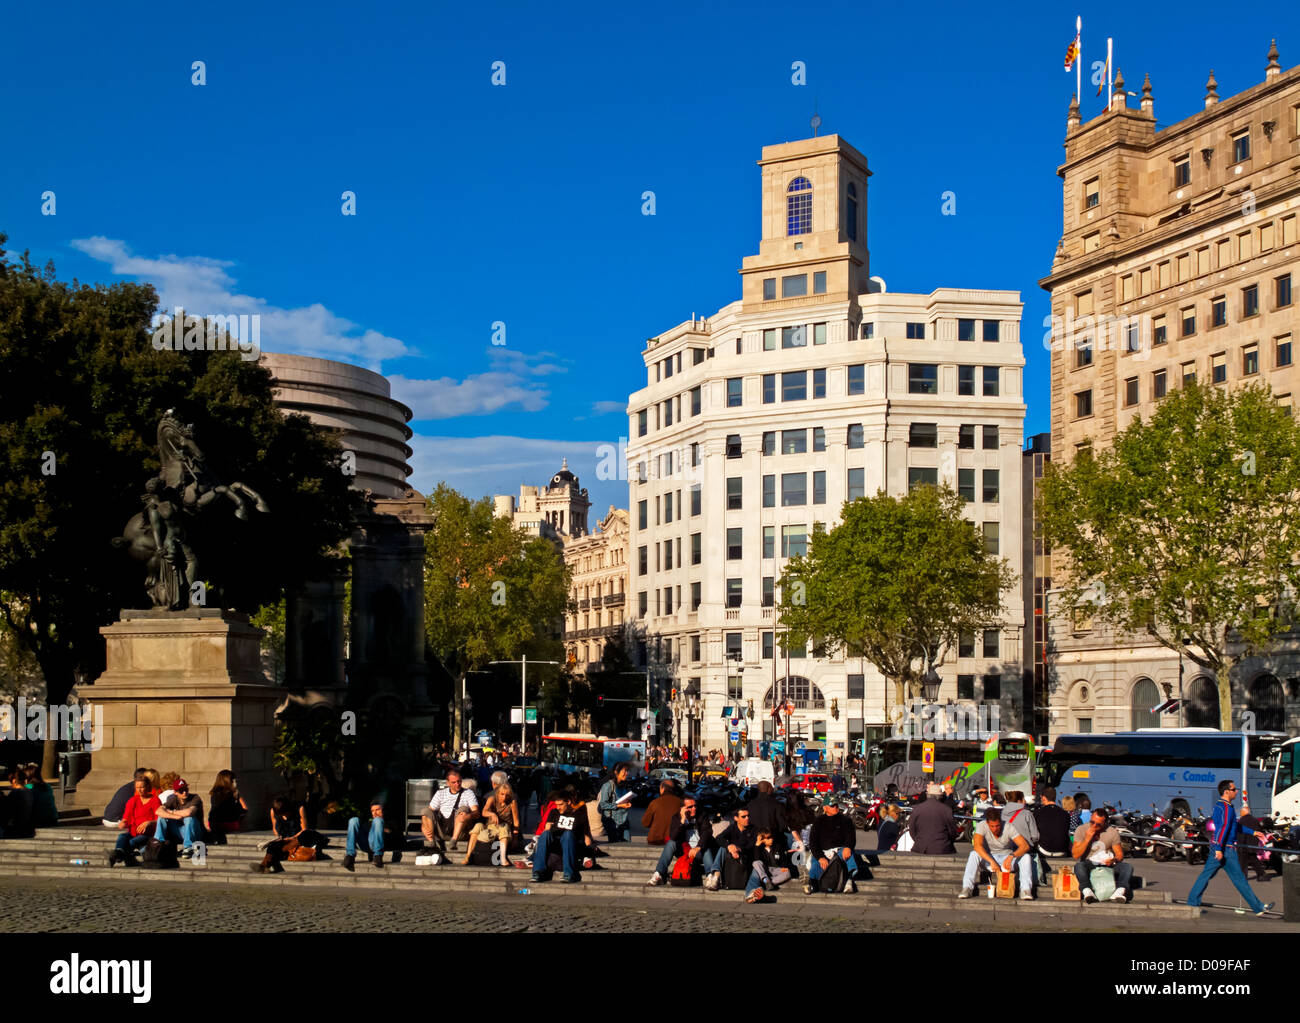 Plaça de Catalunya or Plaza de Cataluña in central Barcelona Catalonia Spain with tourists on steps in foreground Stock Photo